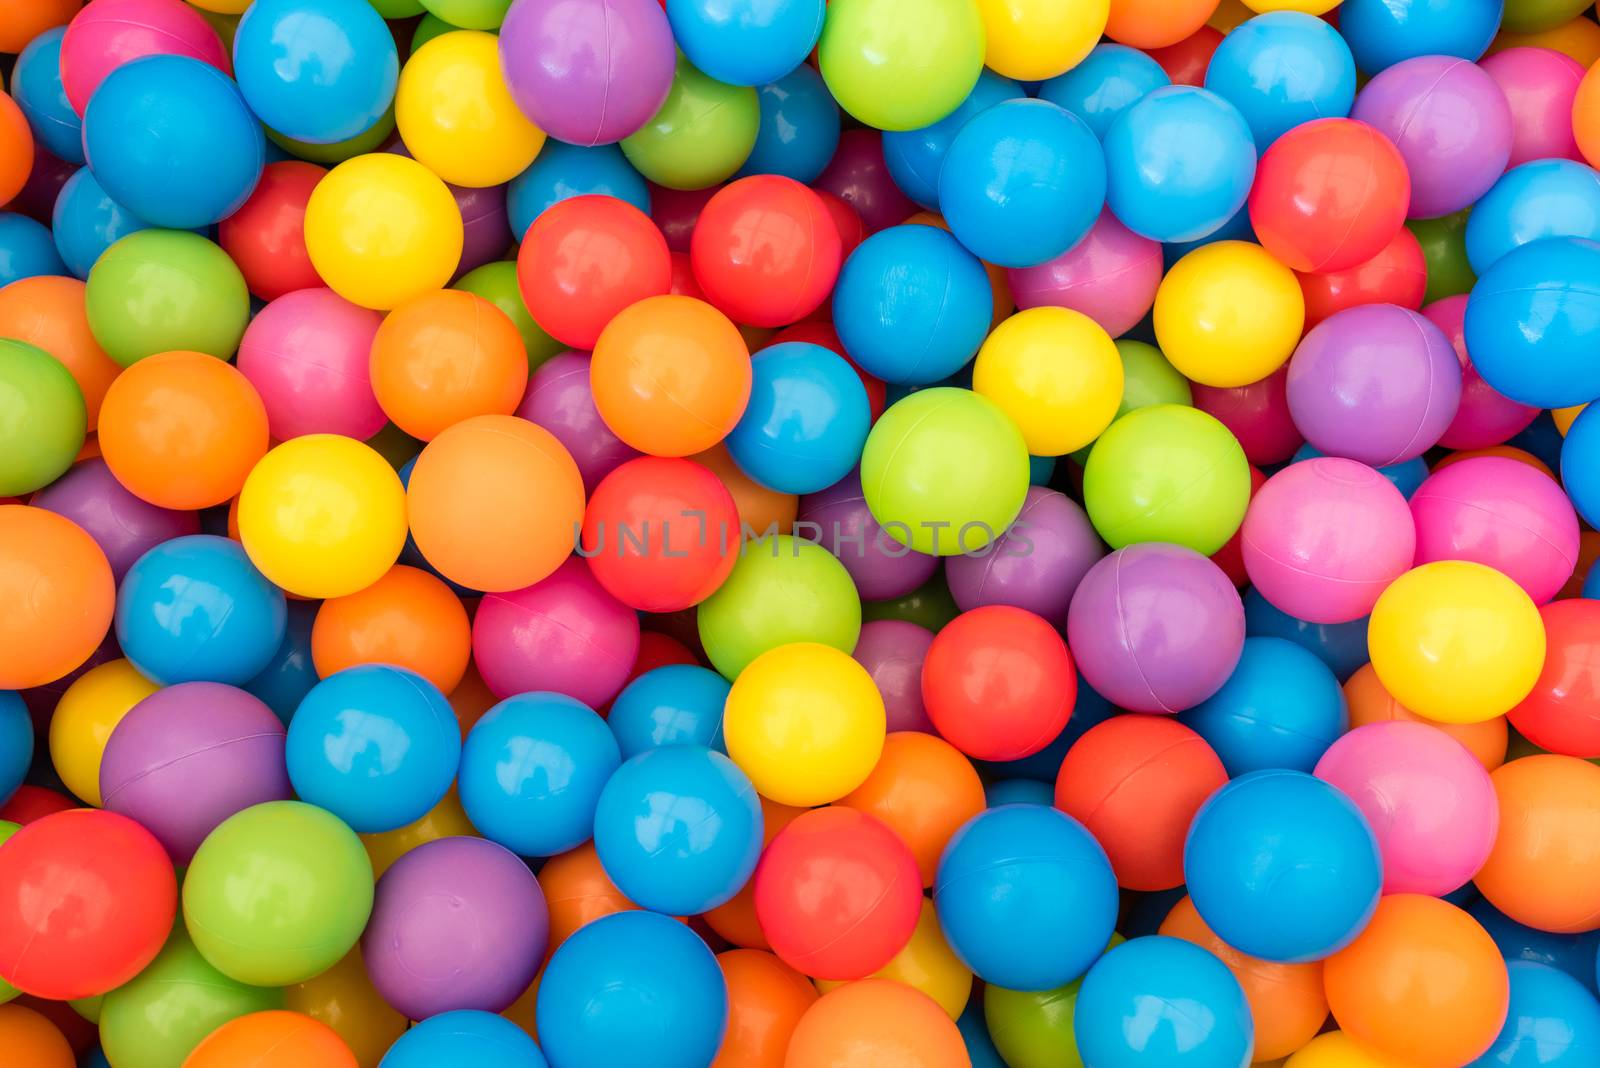 Colorful Ball Pit by justtscott